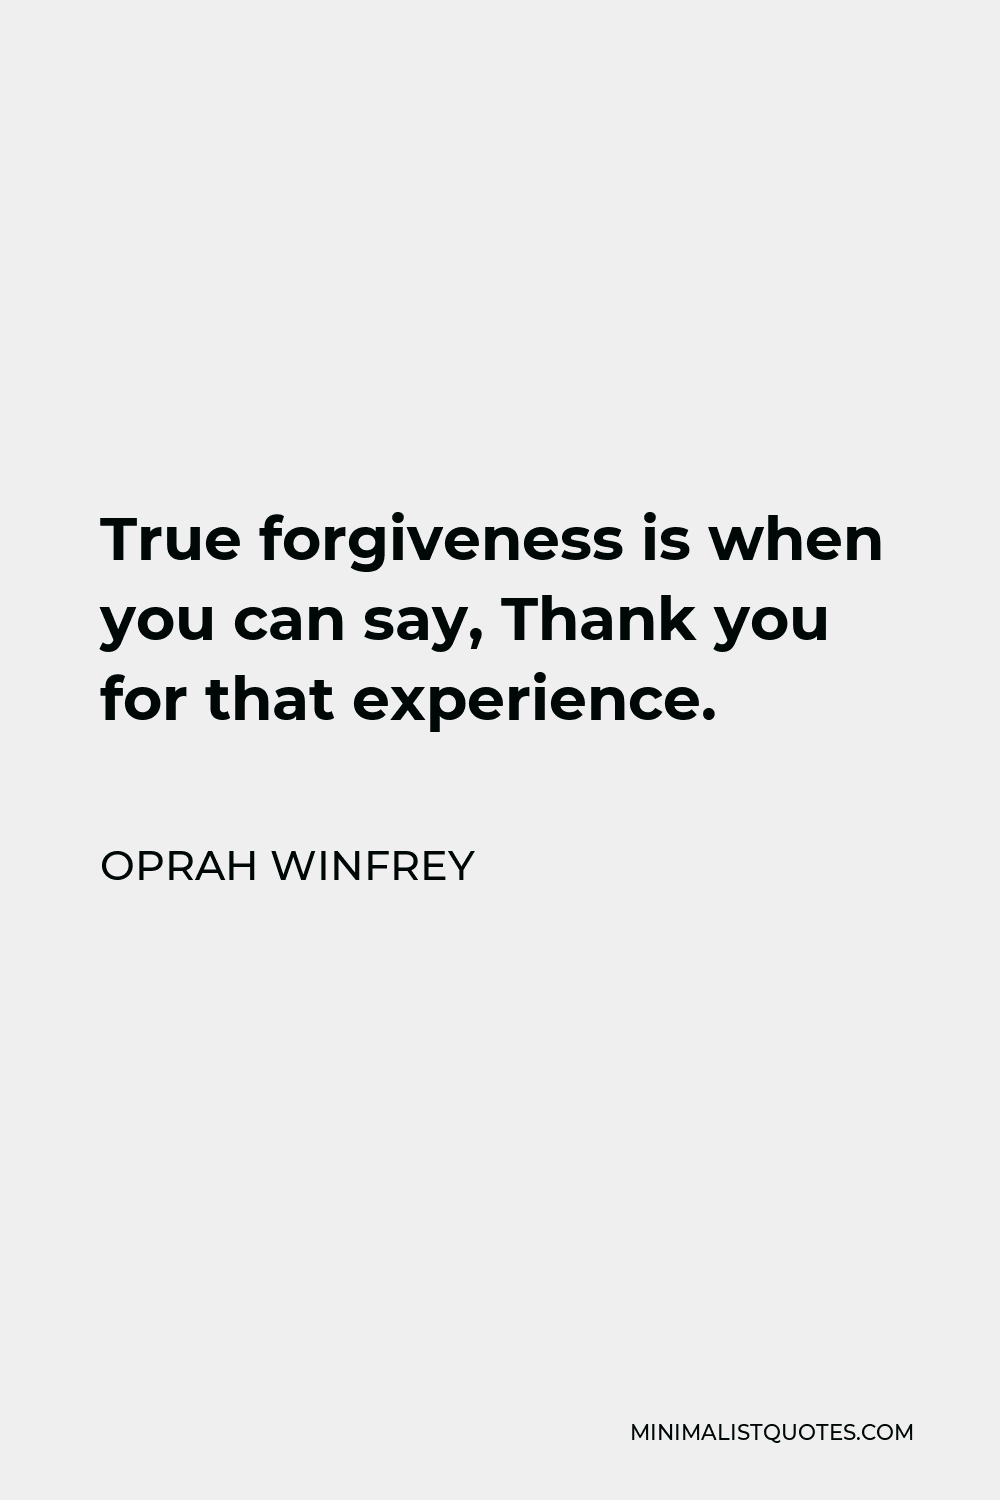 Oprah Winfrey Quote - True forgiveness is when you can say, Thank you for that experience.